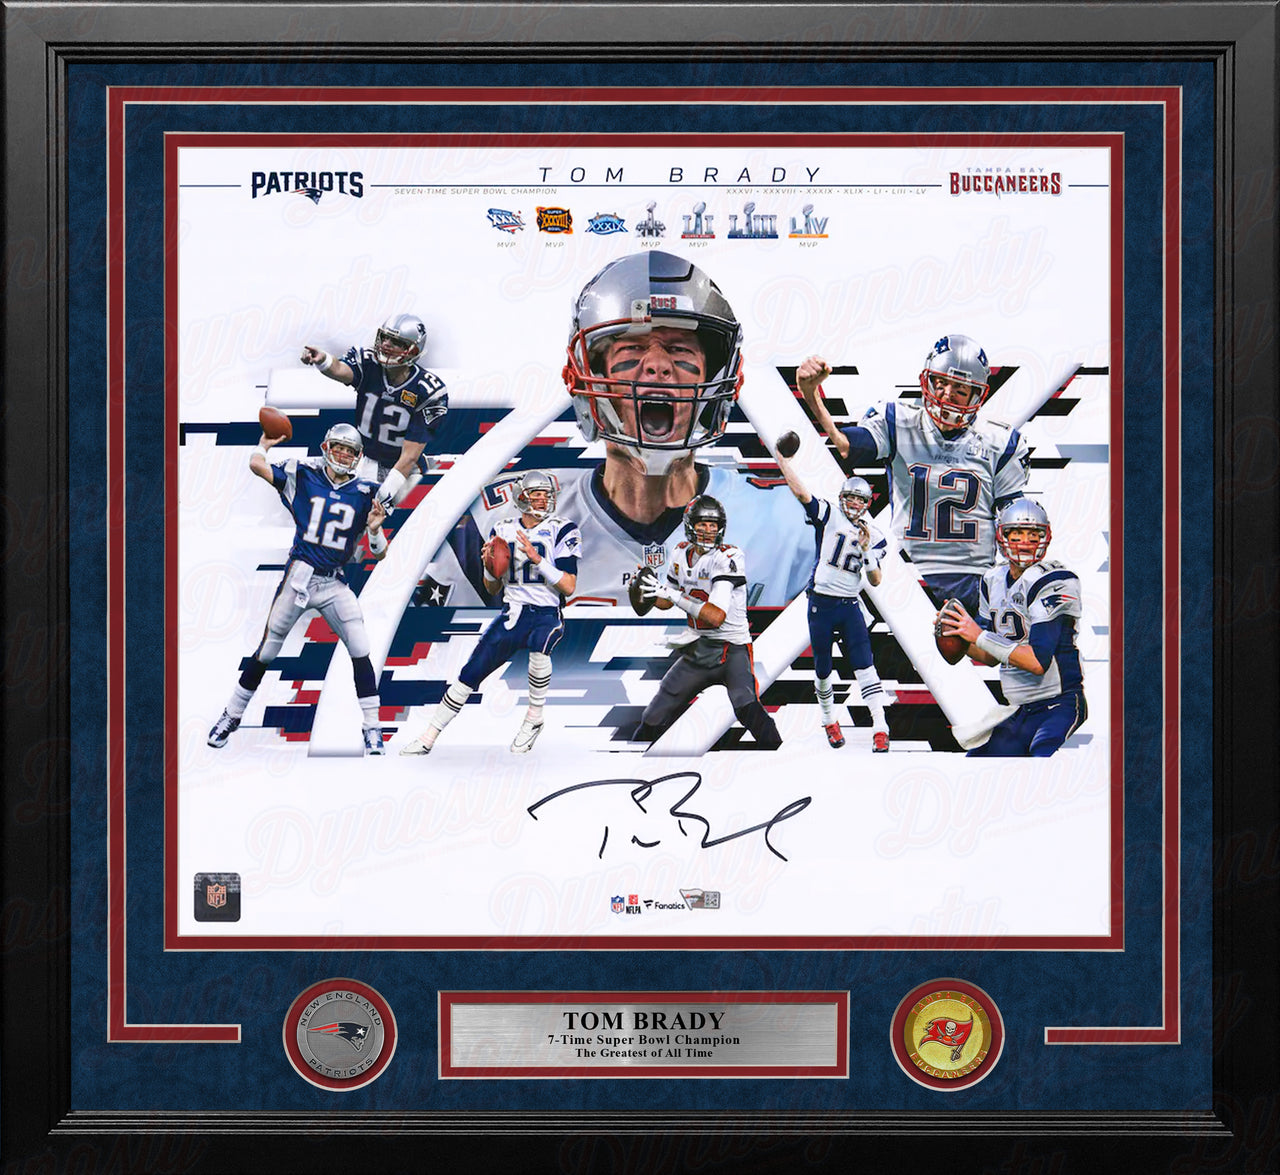 Tom Brady New England Patriots & Tampa Bay Buccaneers Autographed 16" x 20" Framed Collage Photo - Dynasty Sports & Framing 